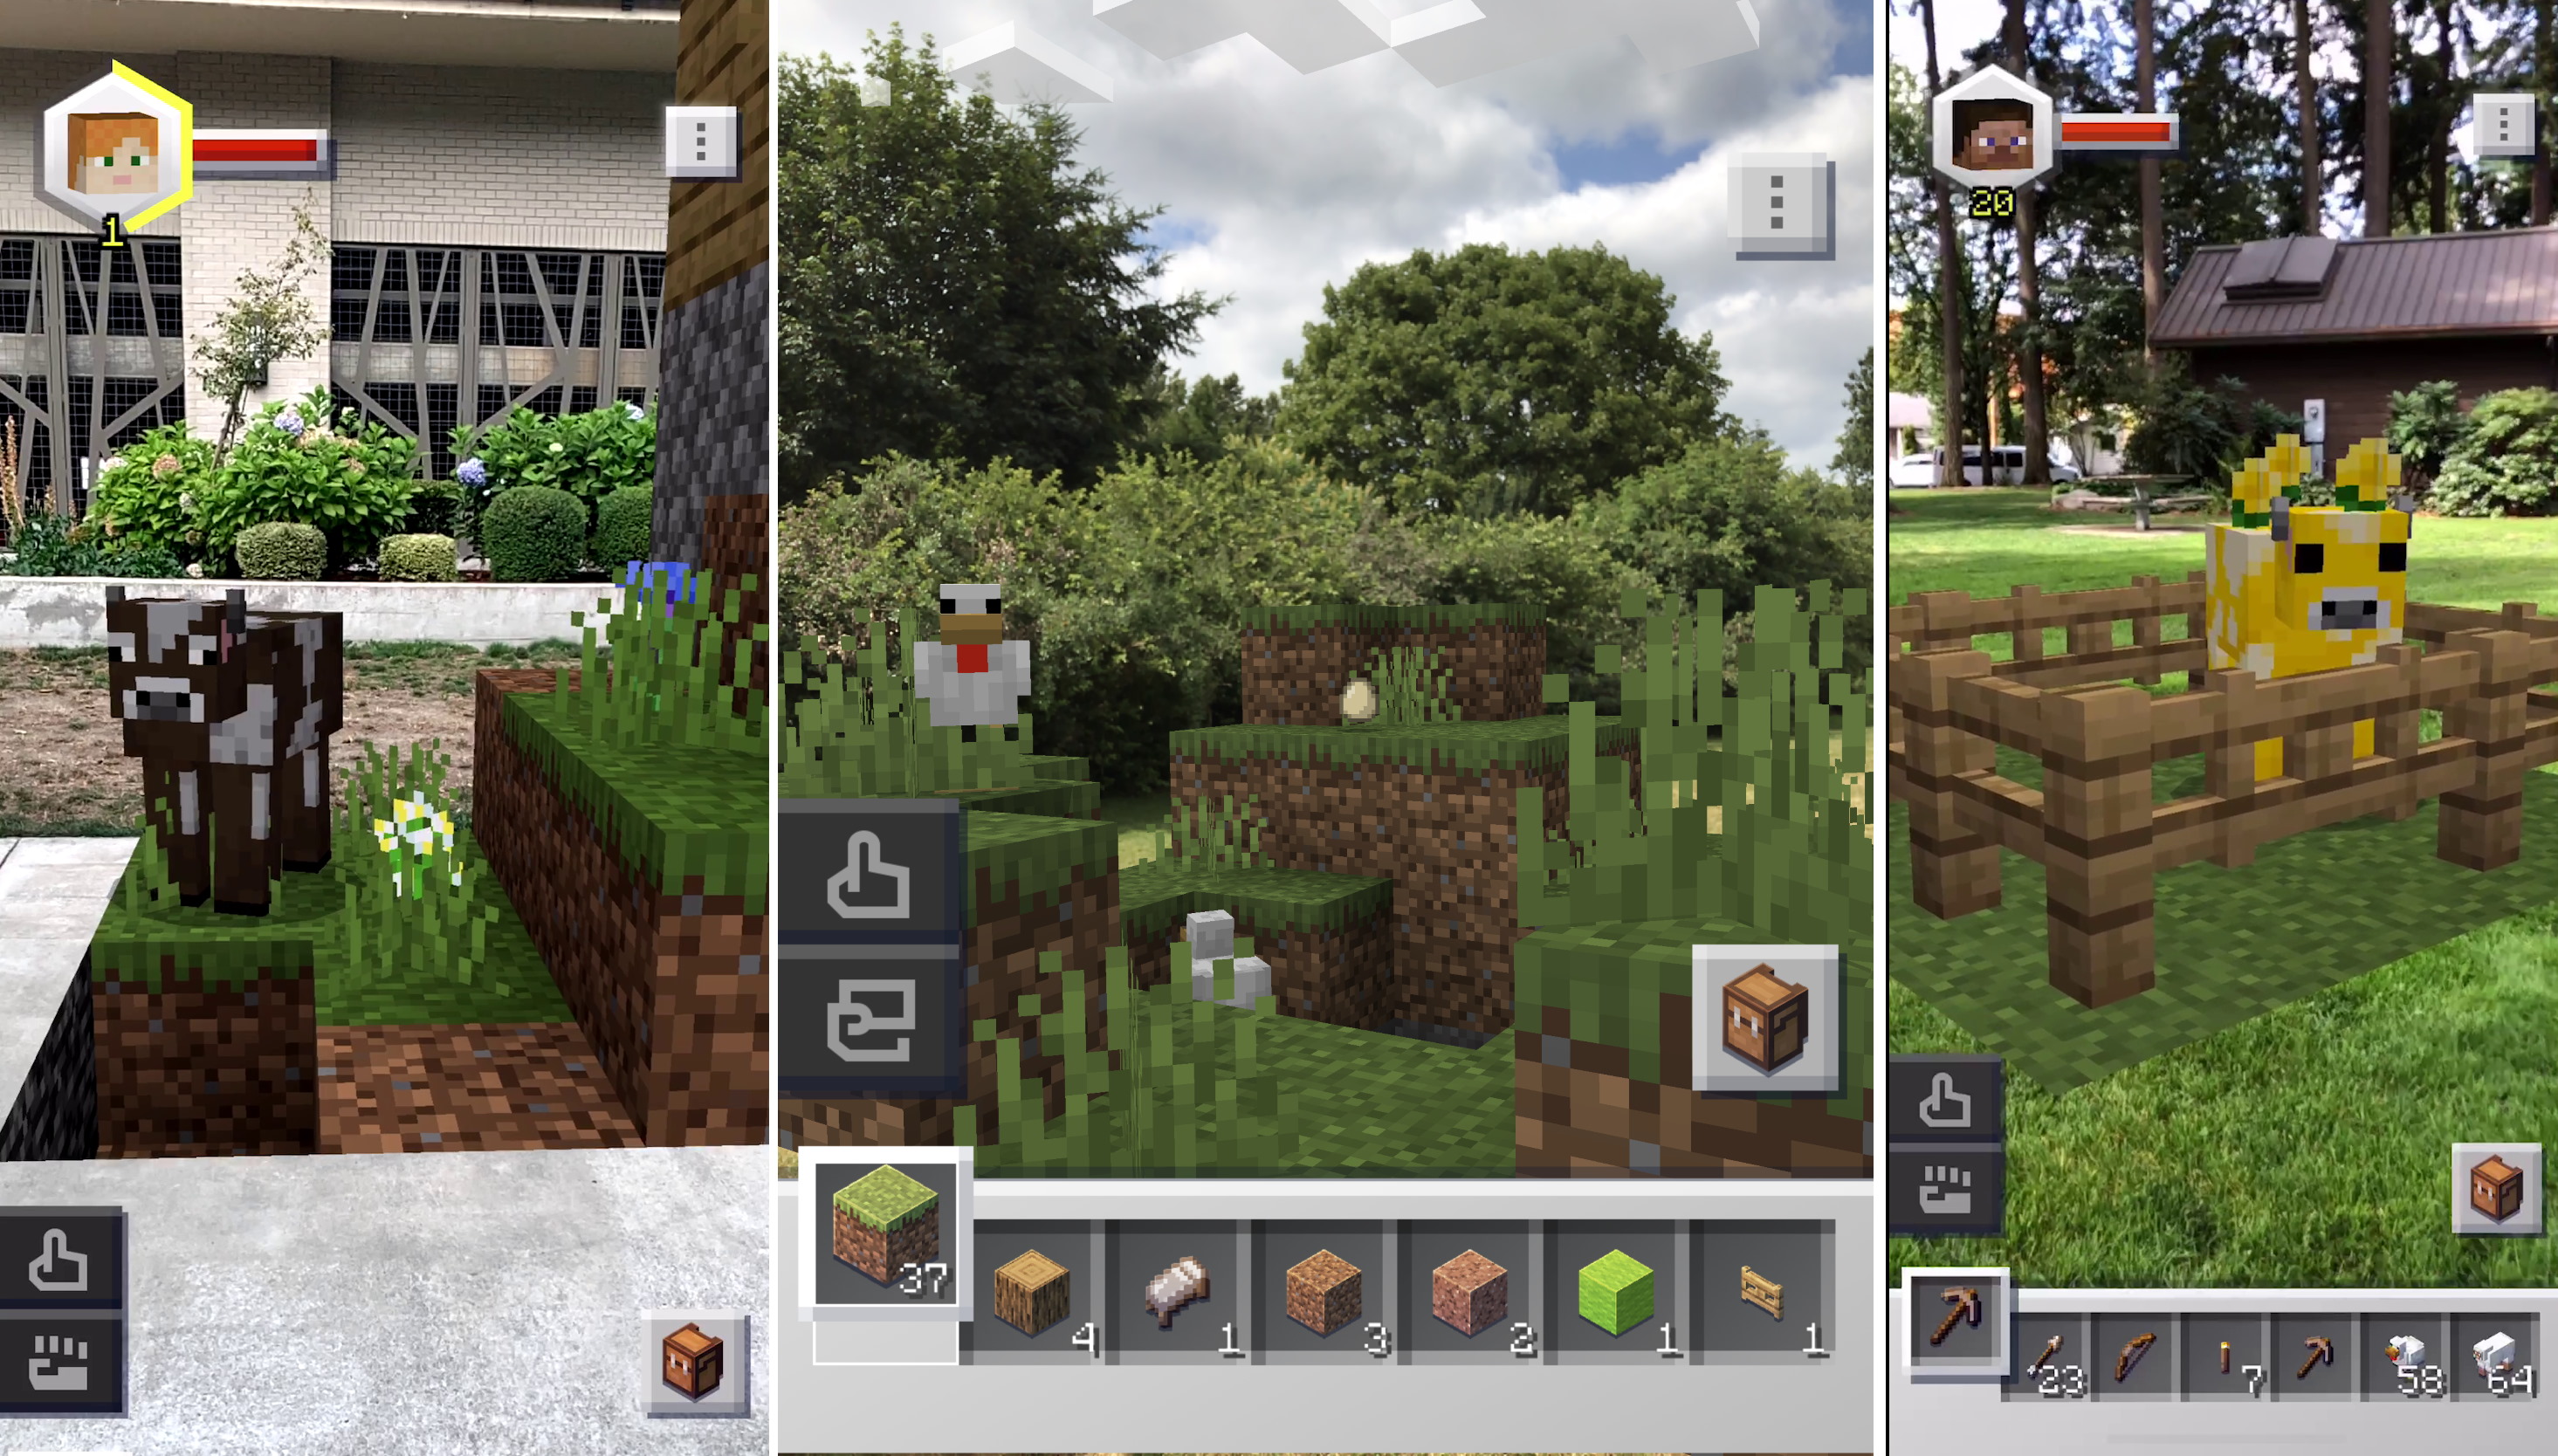 Minecraft Earth' brings block-building to the real world like